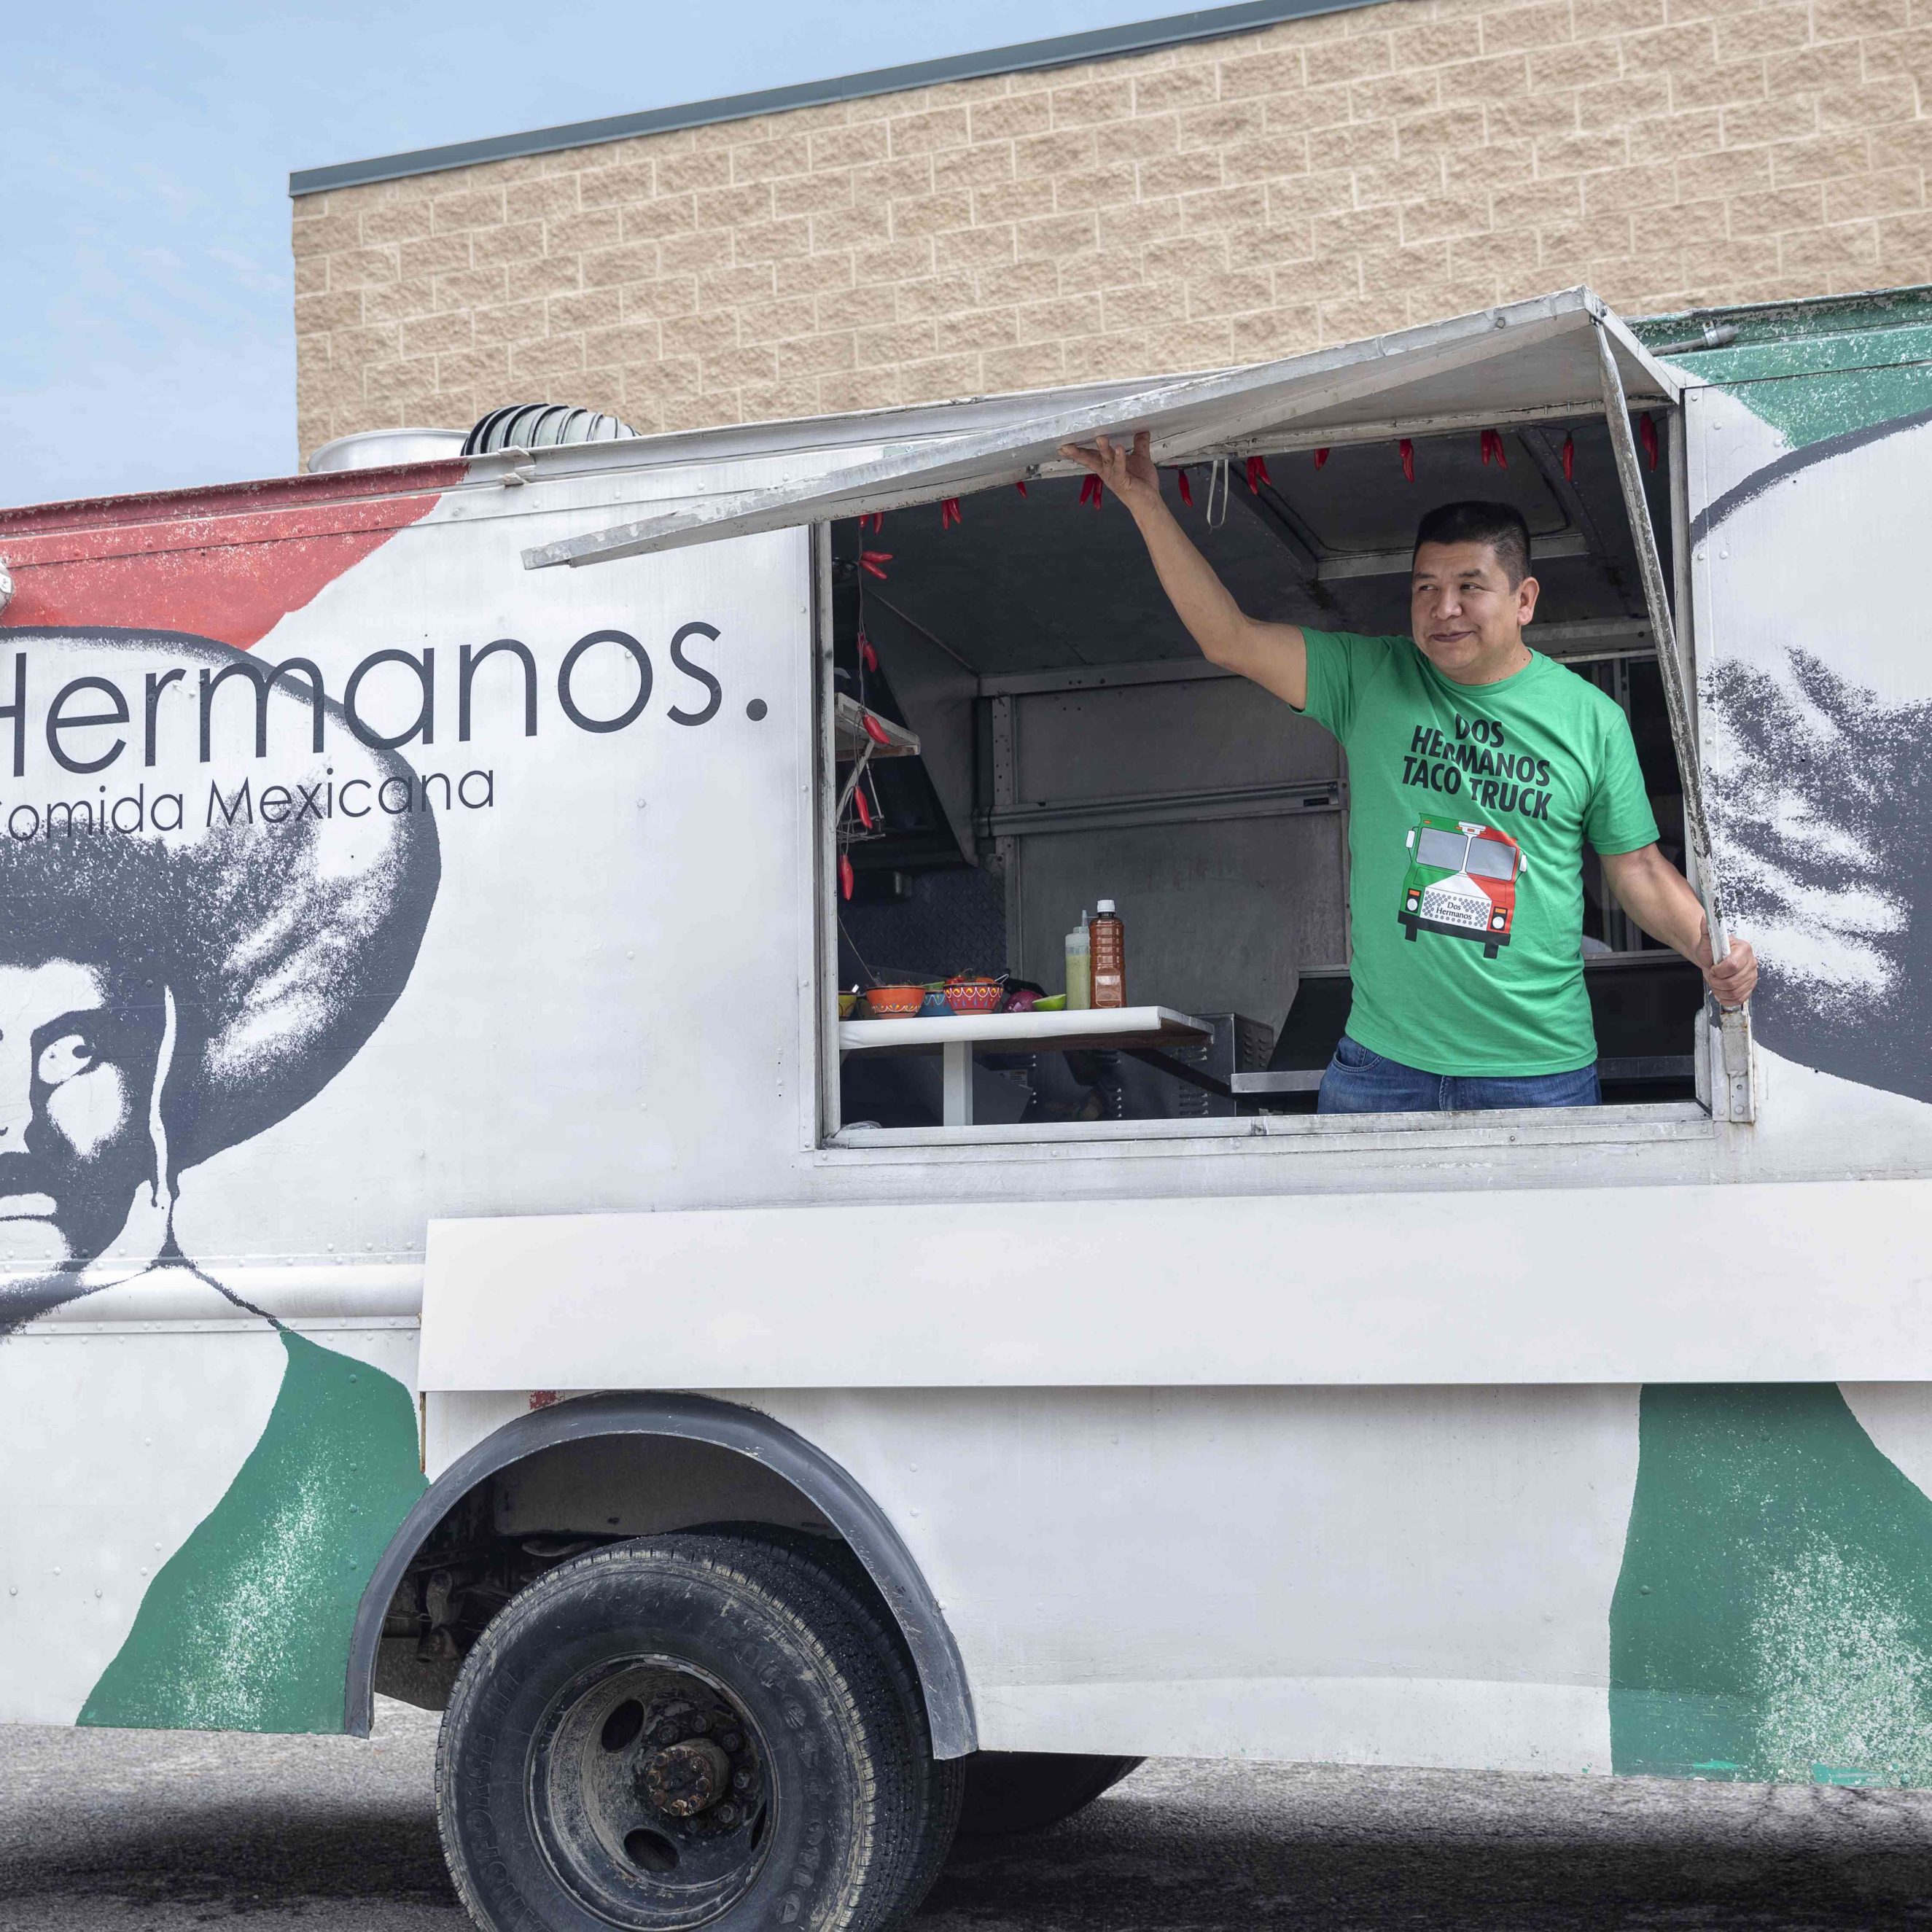 Owner and cofounder of Dos Hermanos Taco Truck